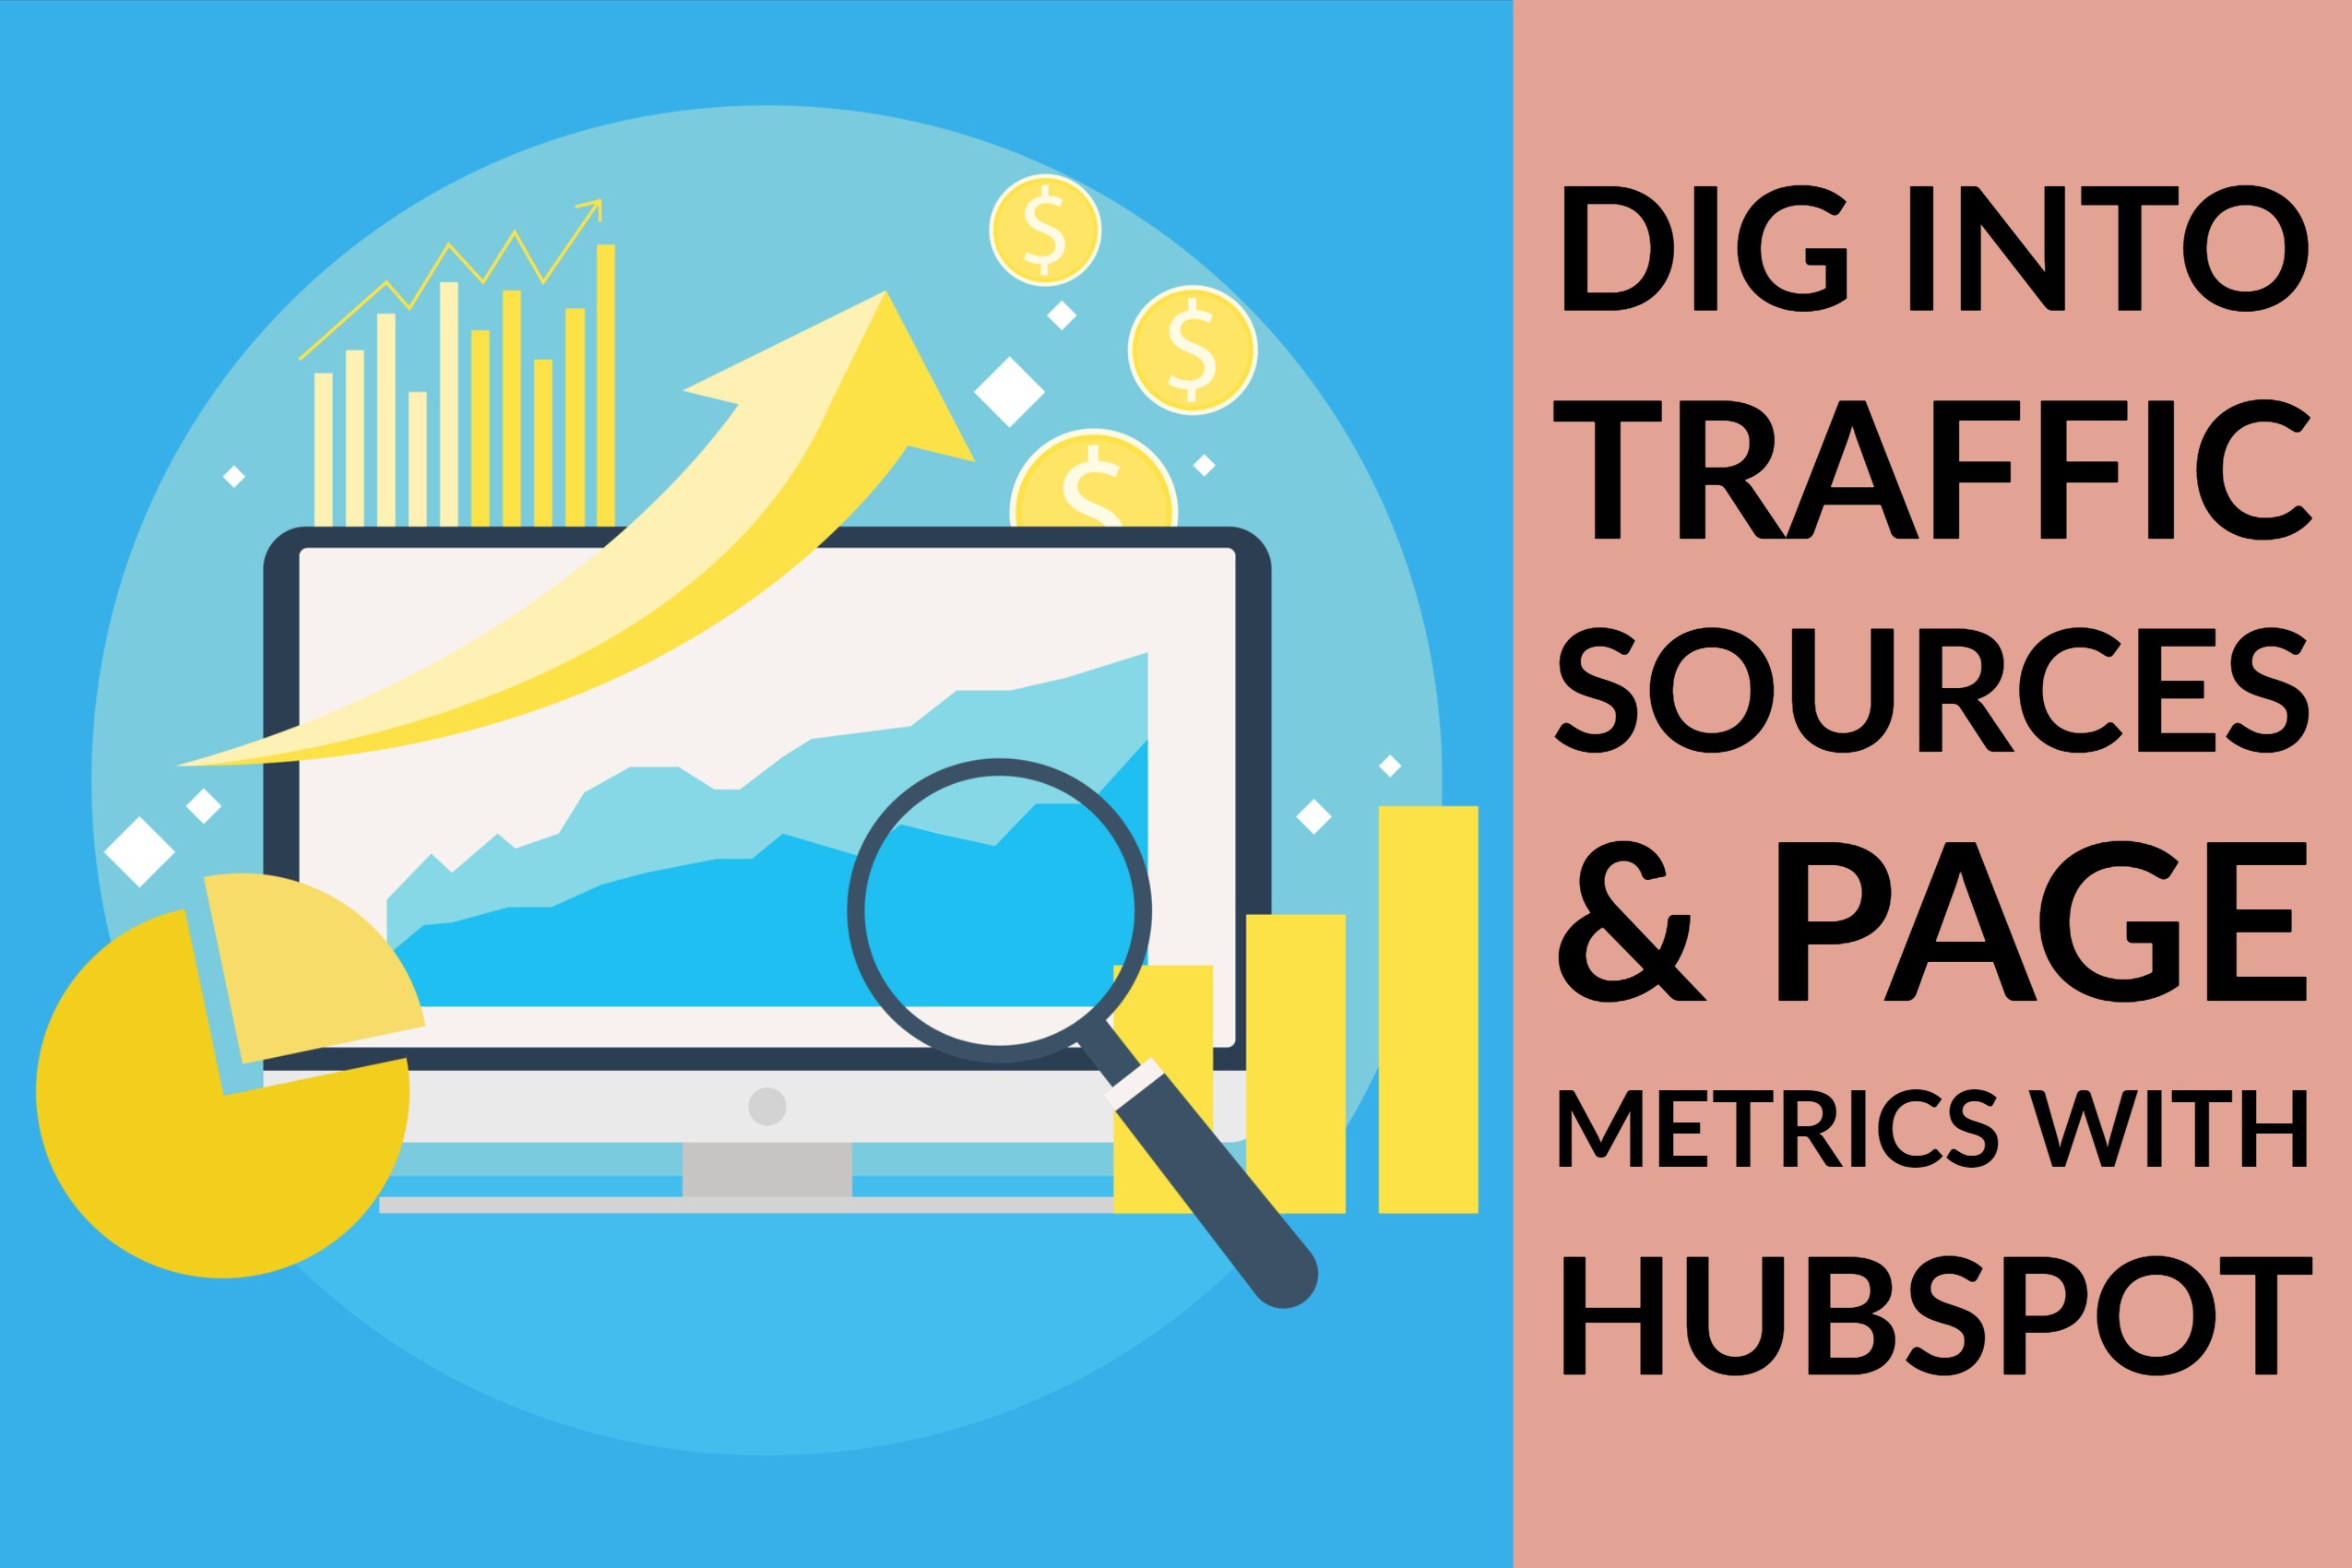 Dig Into Traffic Sources & Page Metrics With HubSpot